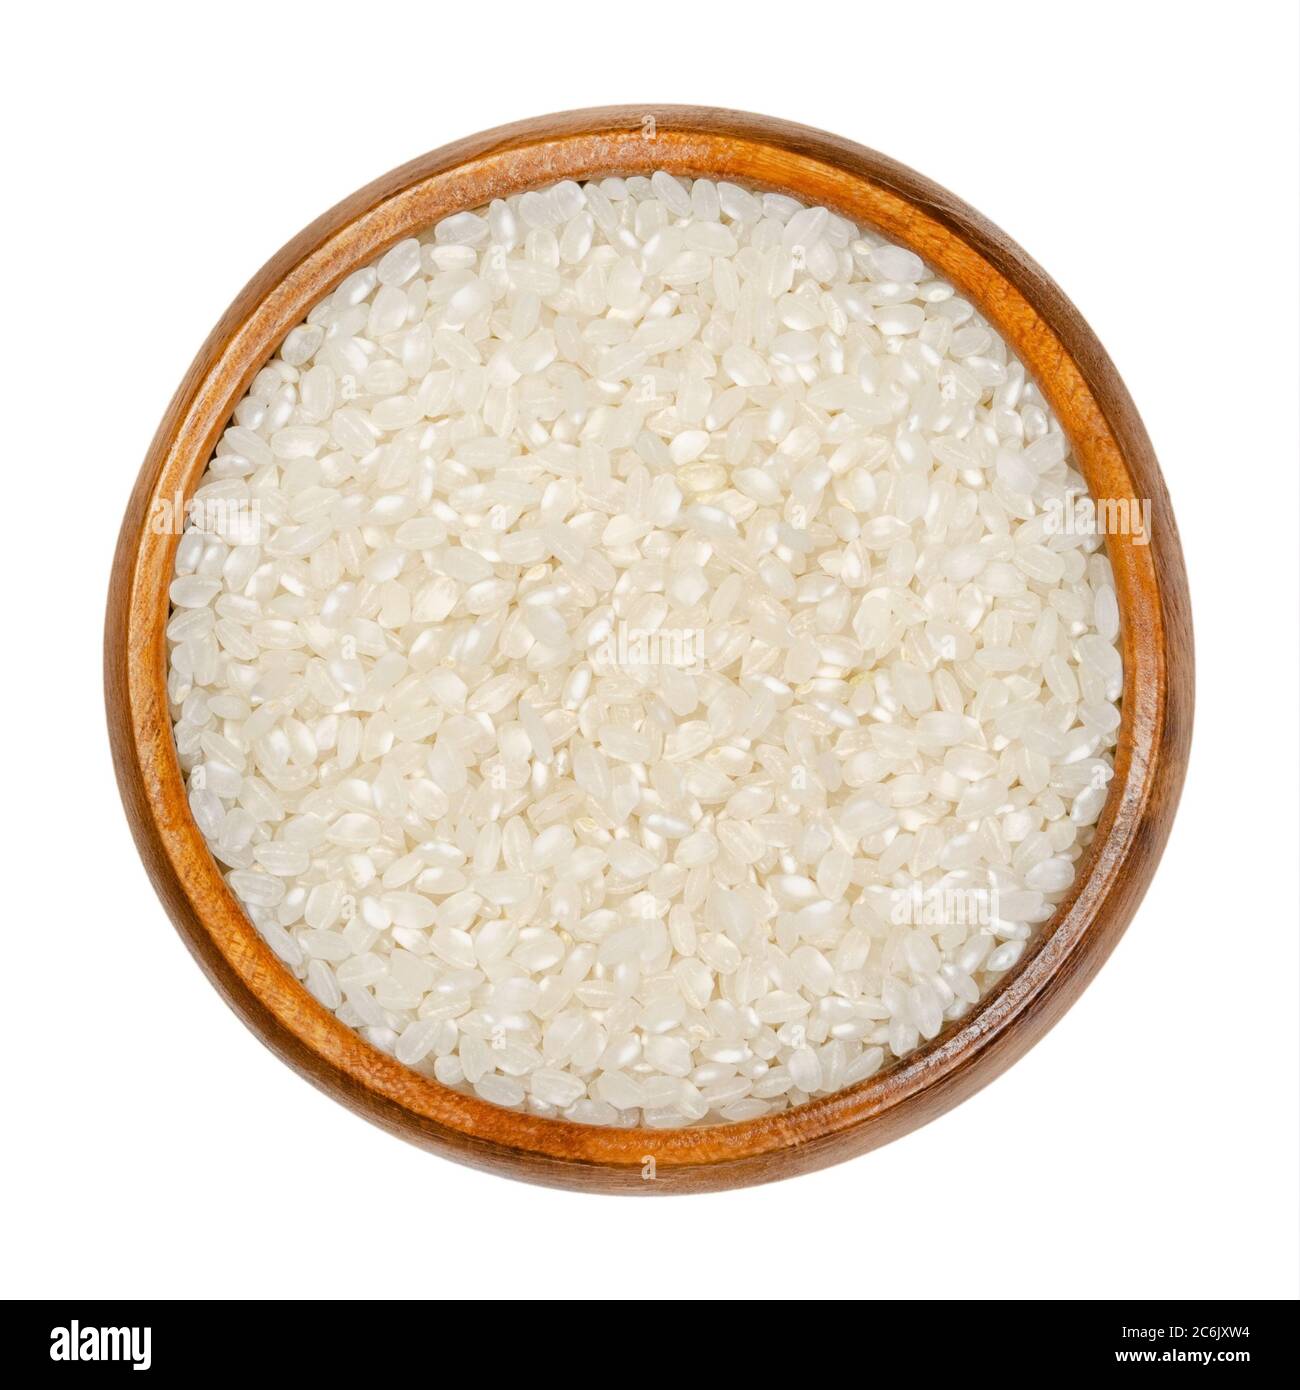 White short grain rice in wooden bowl. Seeds of the grass Oryza sativa, also known as Asian rice. Cereal grain and staple food. Stock Photo